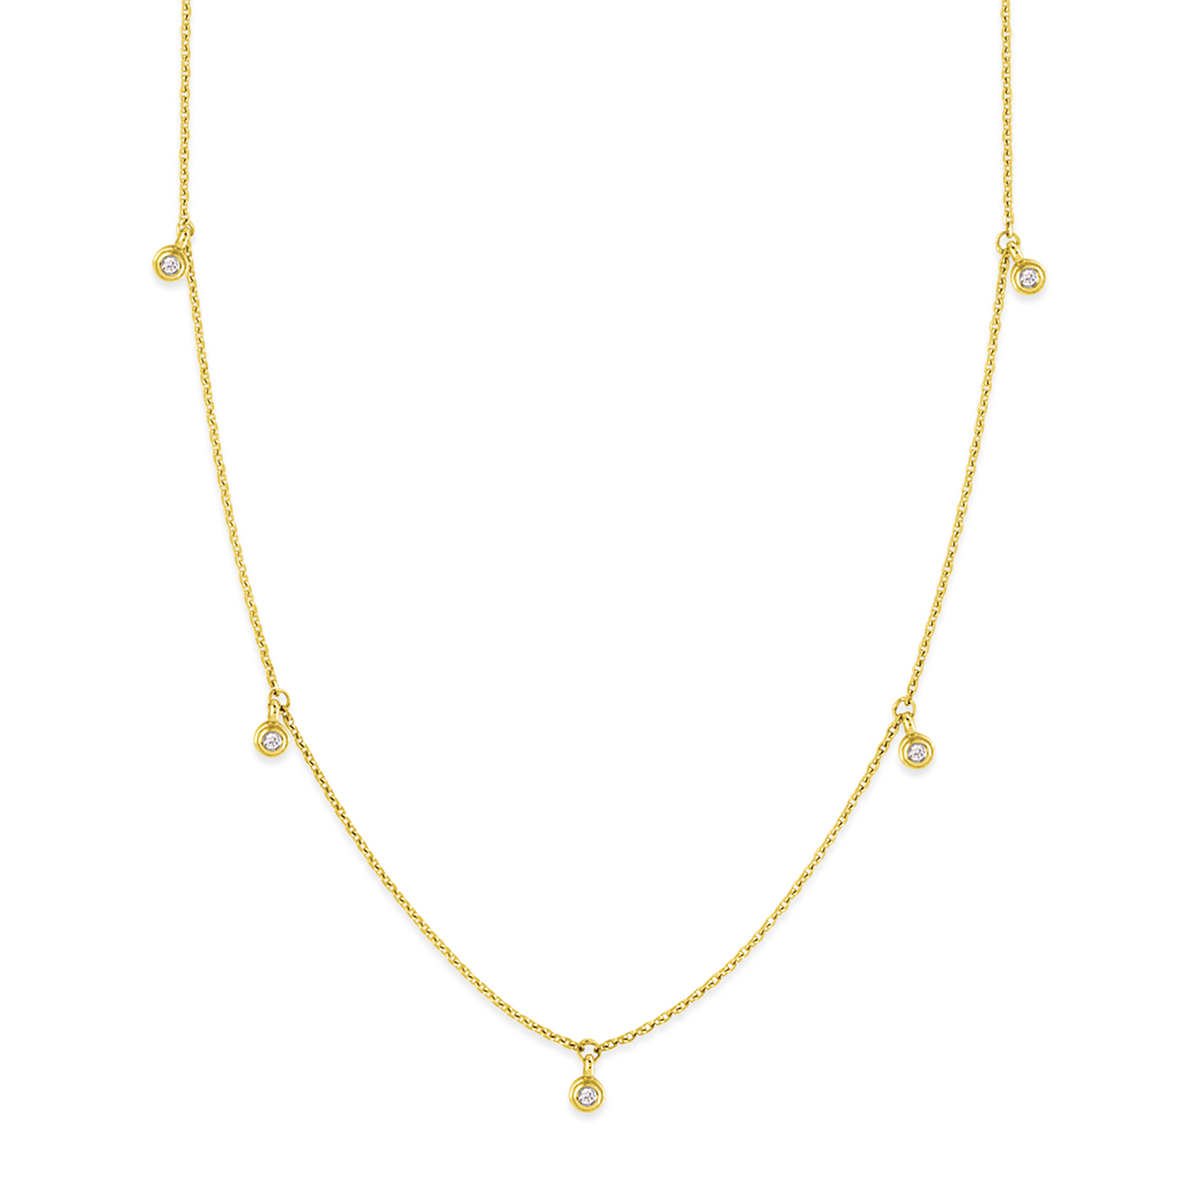 Diamond 5 Station Bezel Set Necklace in Yellow Gold, 18